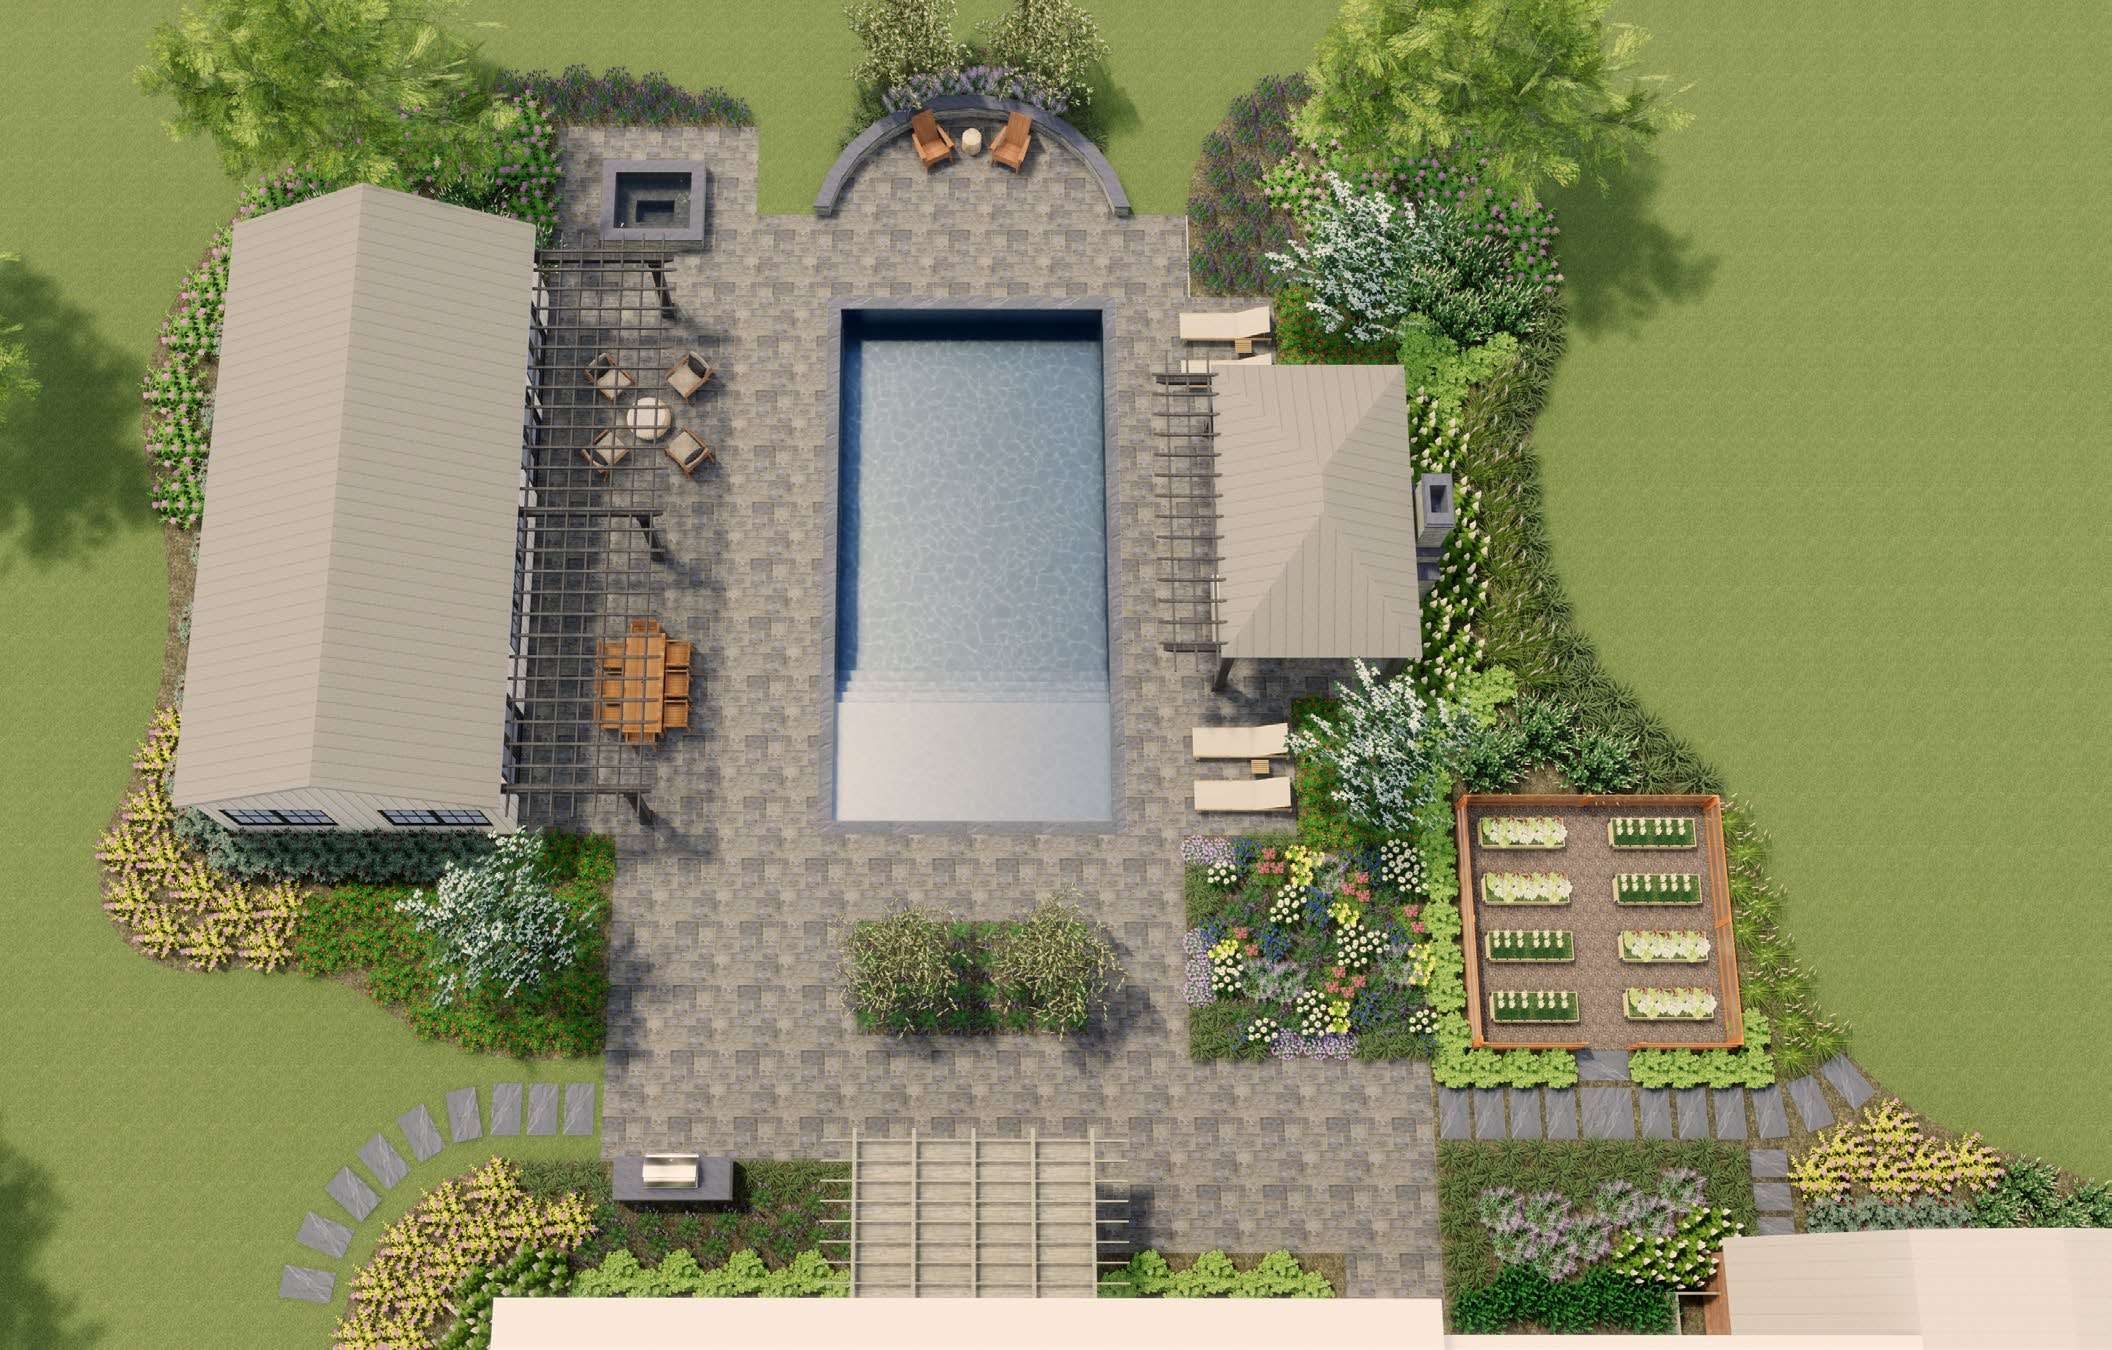 3d rendering of landscape design with pool and patio